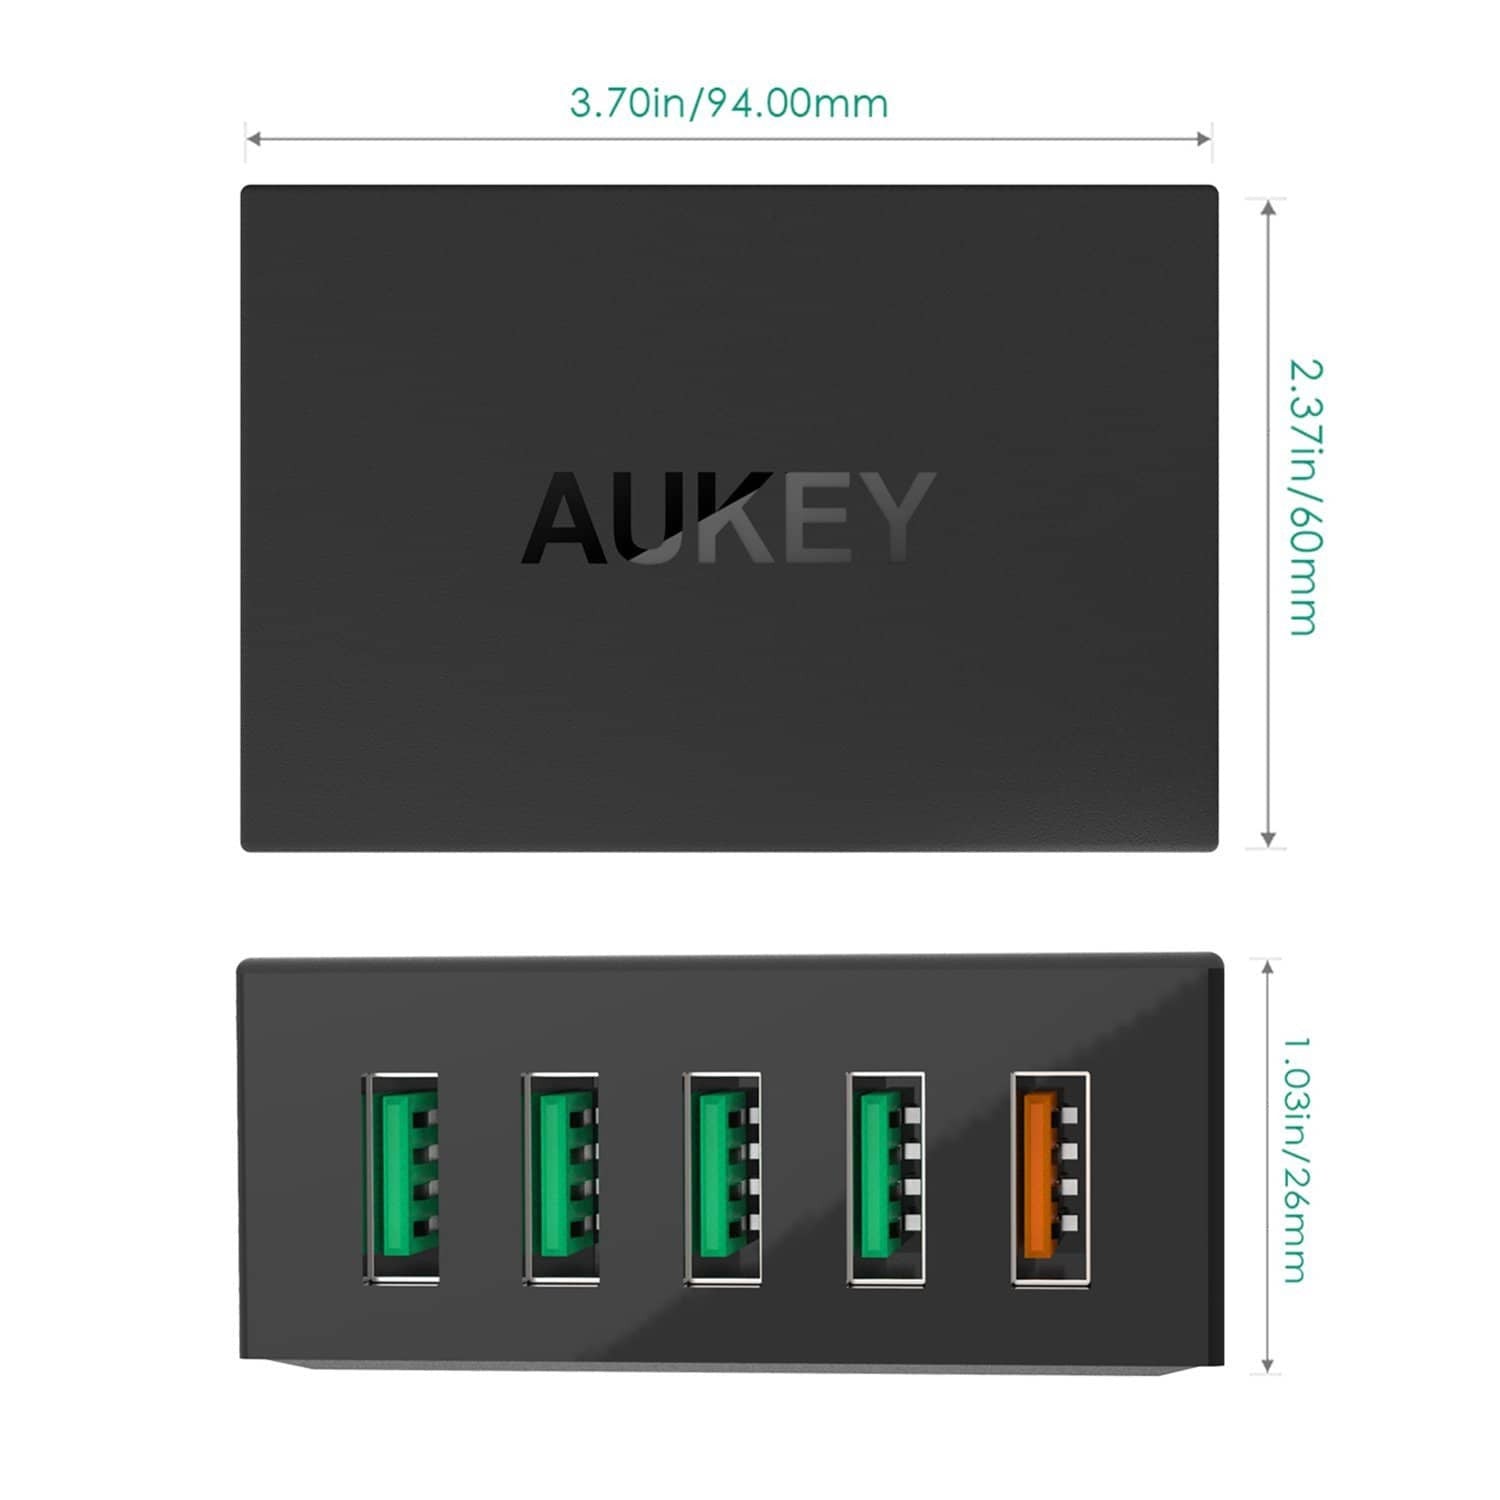 AUKEY PA-T1 54W 5 USB Port Qualcomm Quick Charge 2.0 Desktop Charger - Aukey Malaysia Official Store